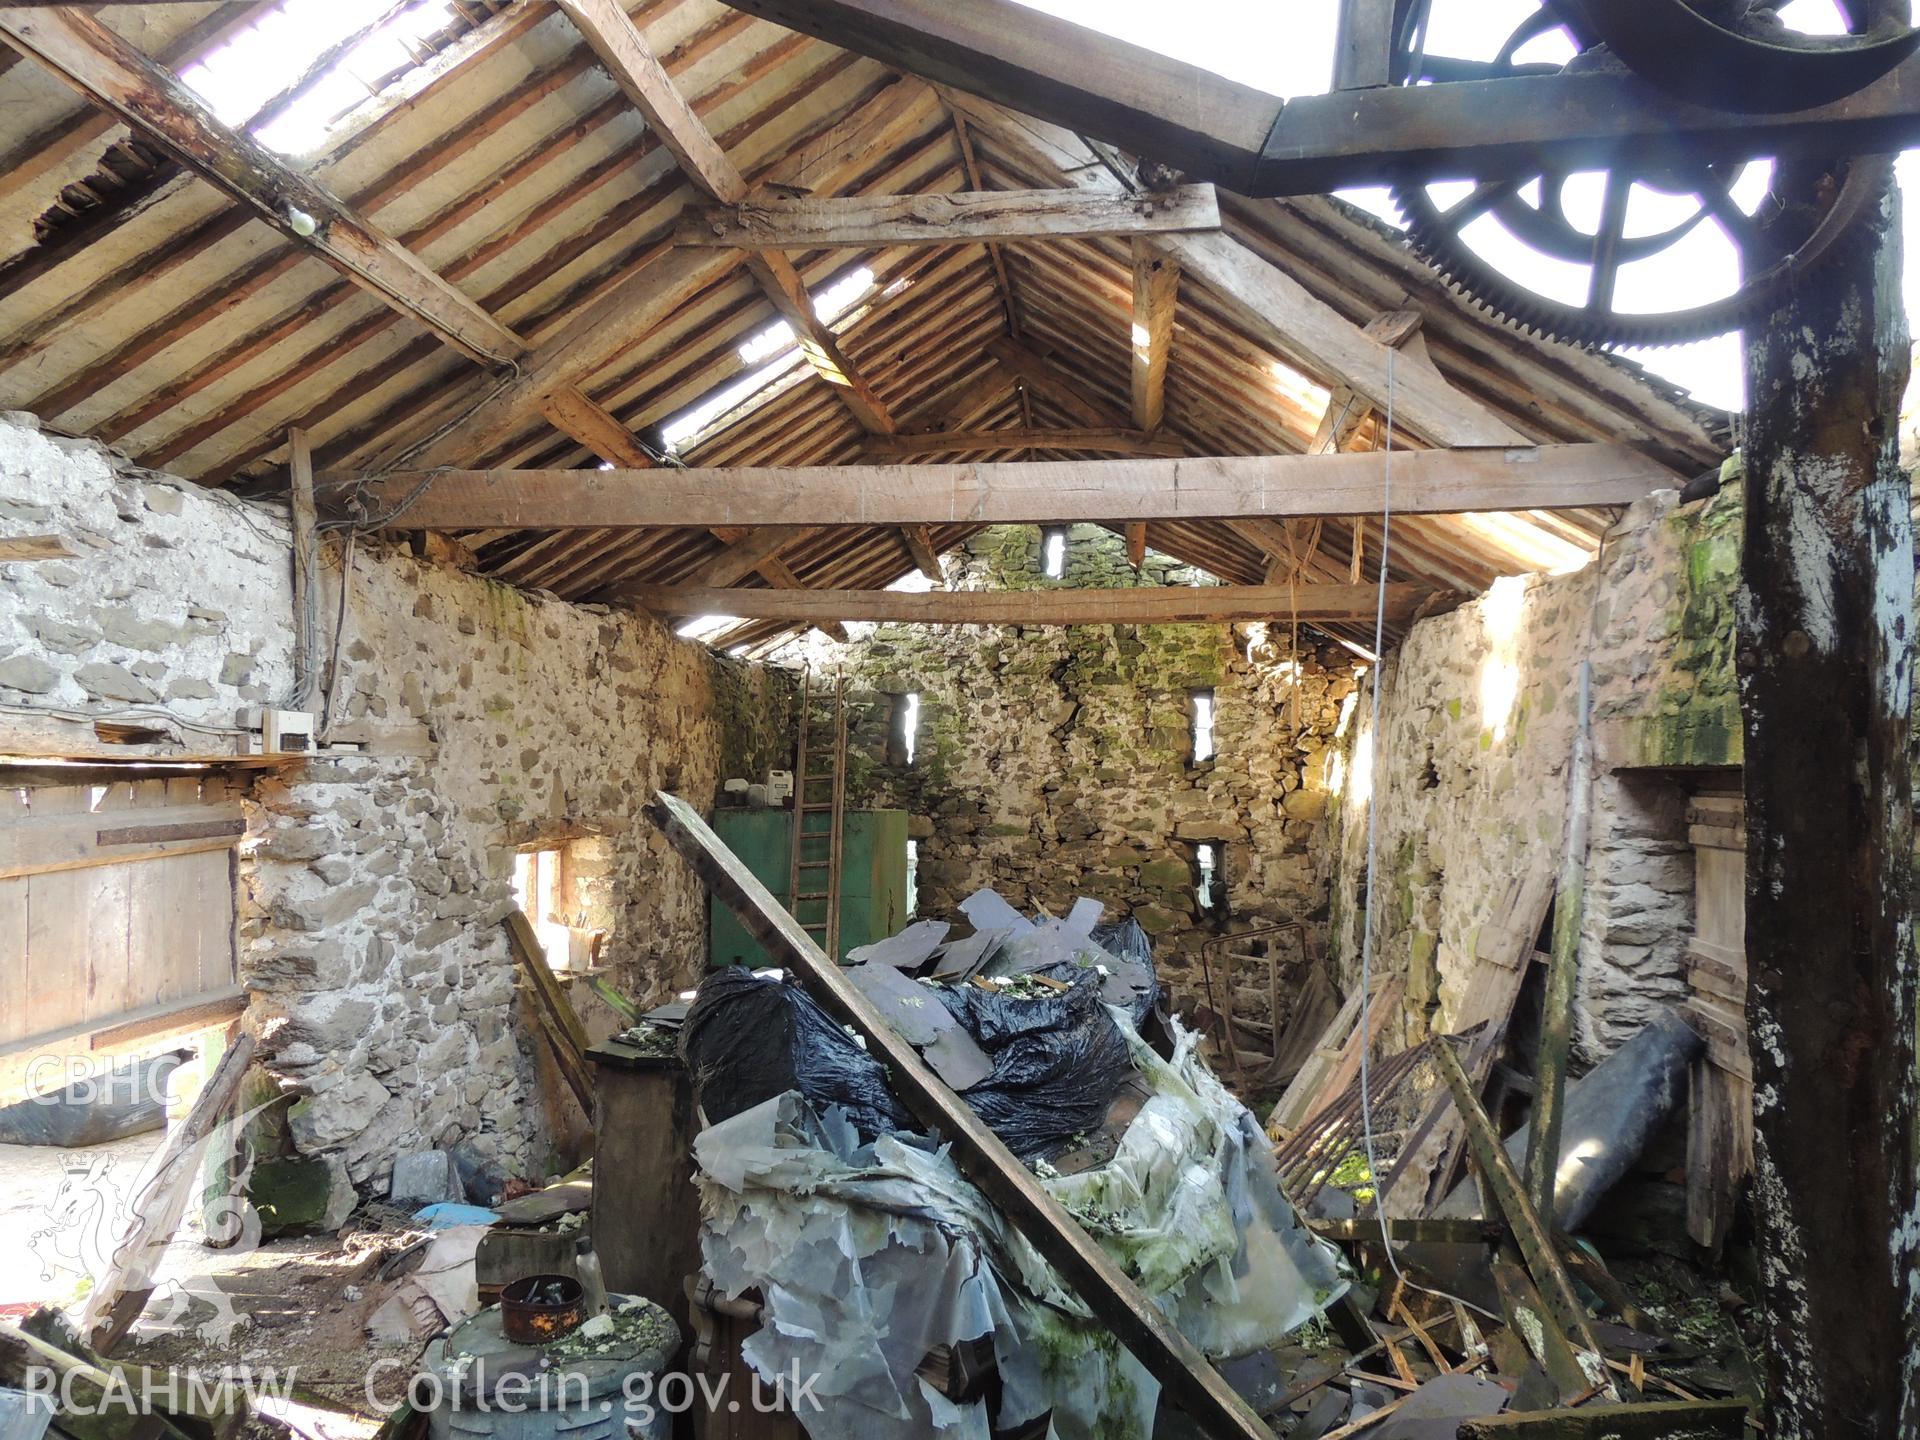 View of barn interior, looking west. Photograph taken as part of archaeological building survey conducted at Bryn Gwylan Threshing Barn, Llangernyw, Conwy, carried out by Archaeology Wales, 2017-2018. Report no. 1640. Project no. 2578.